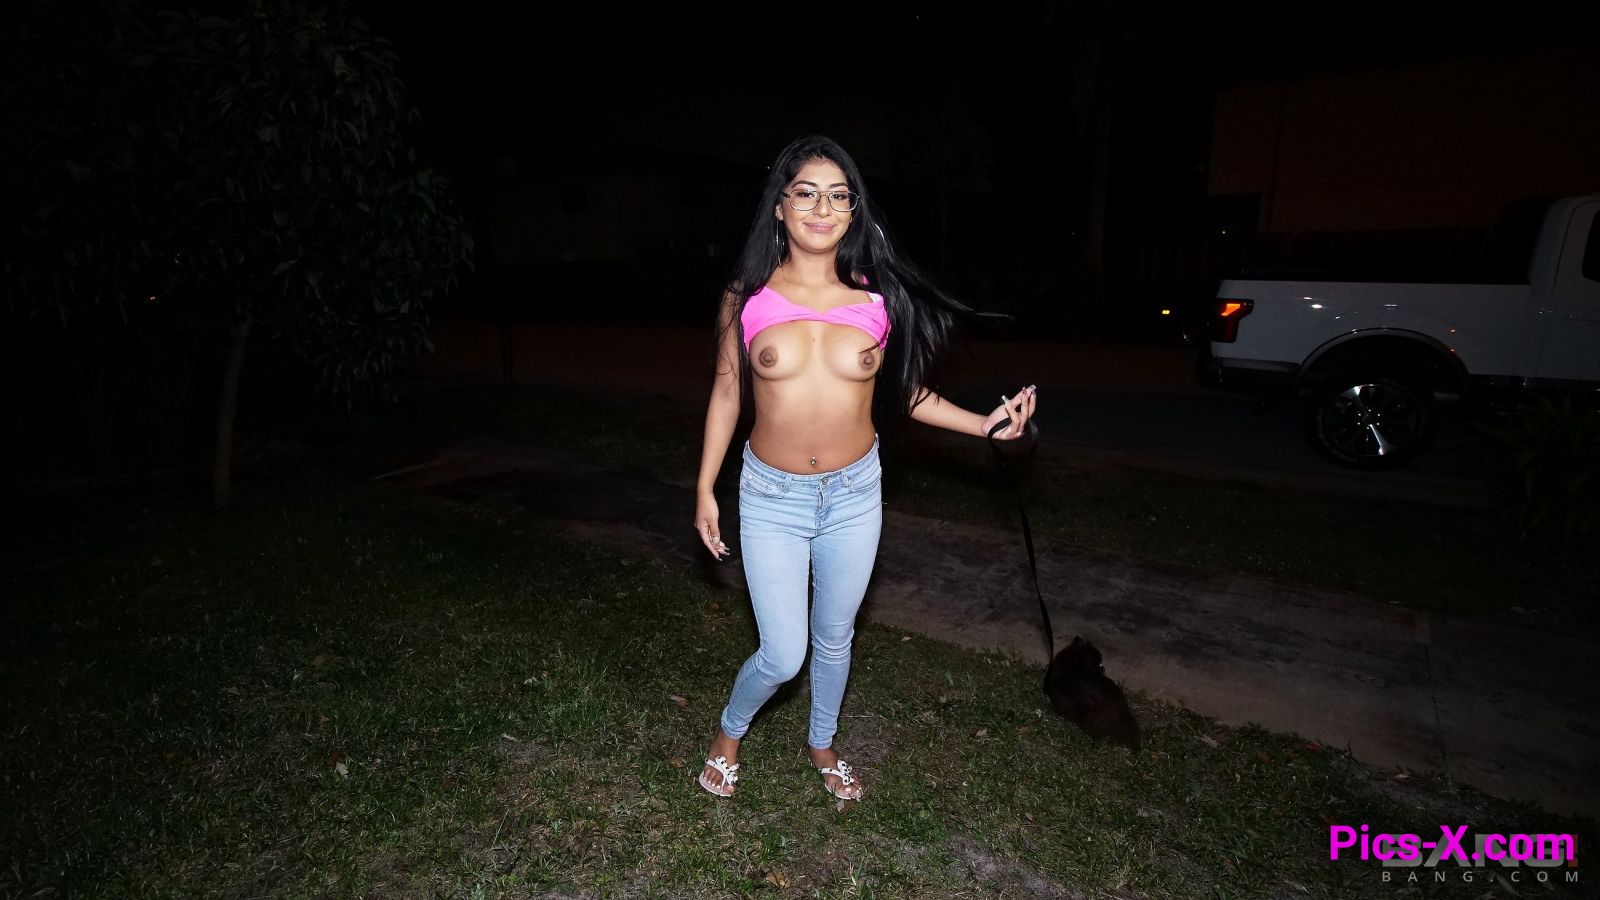 Binky Beal gets her pussy destroyed in her own driveway - Image 14